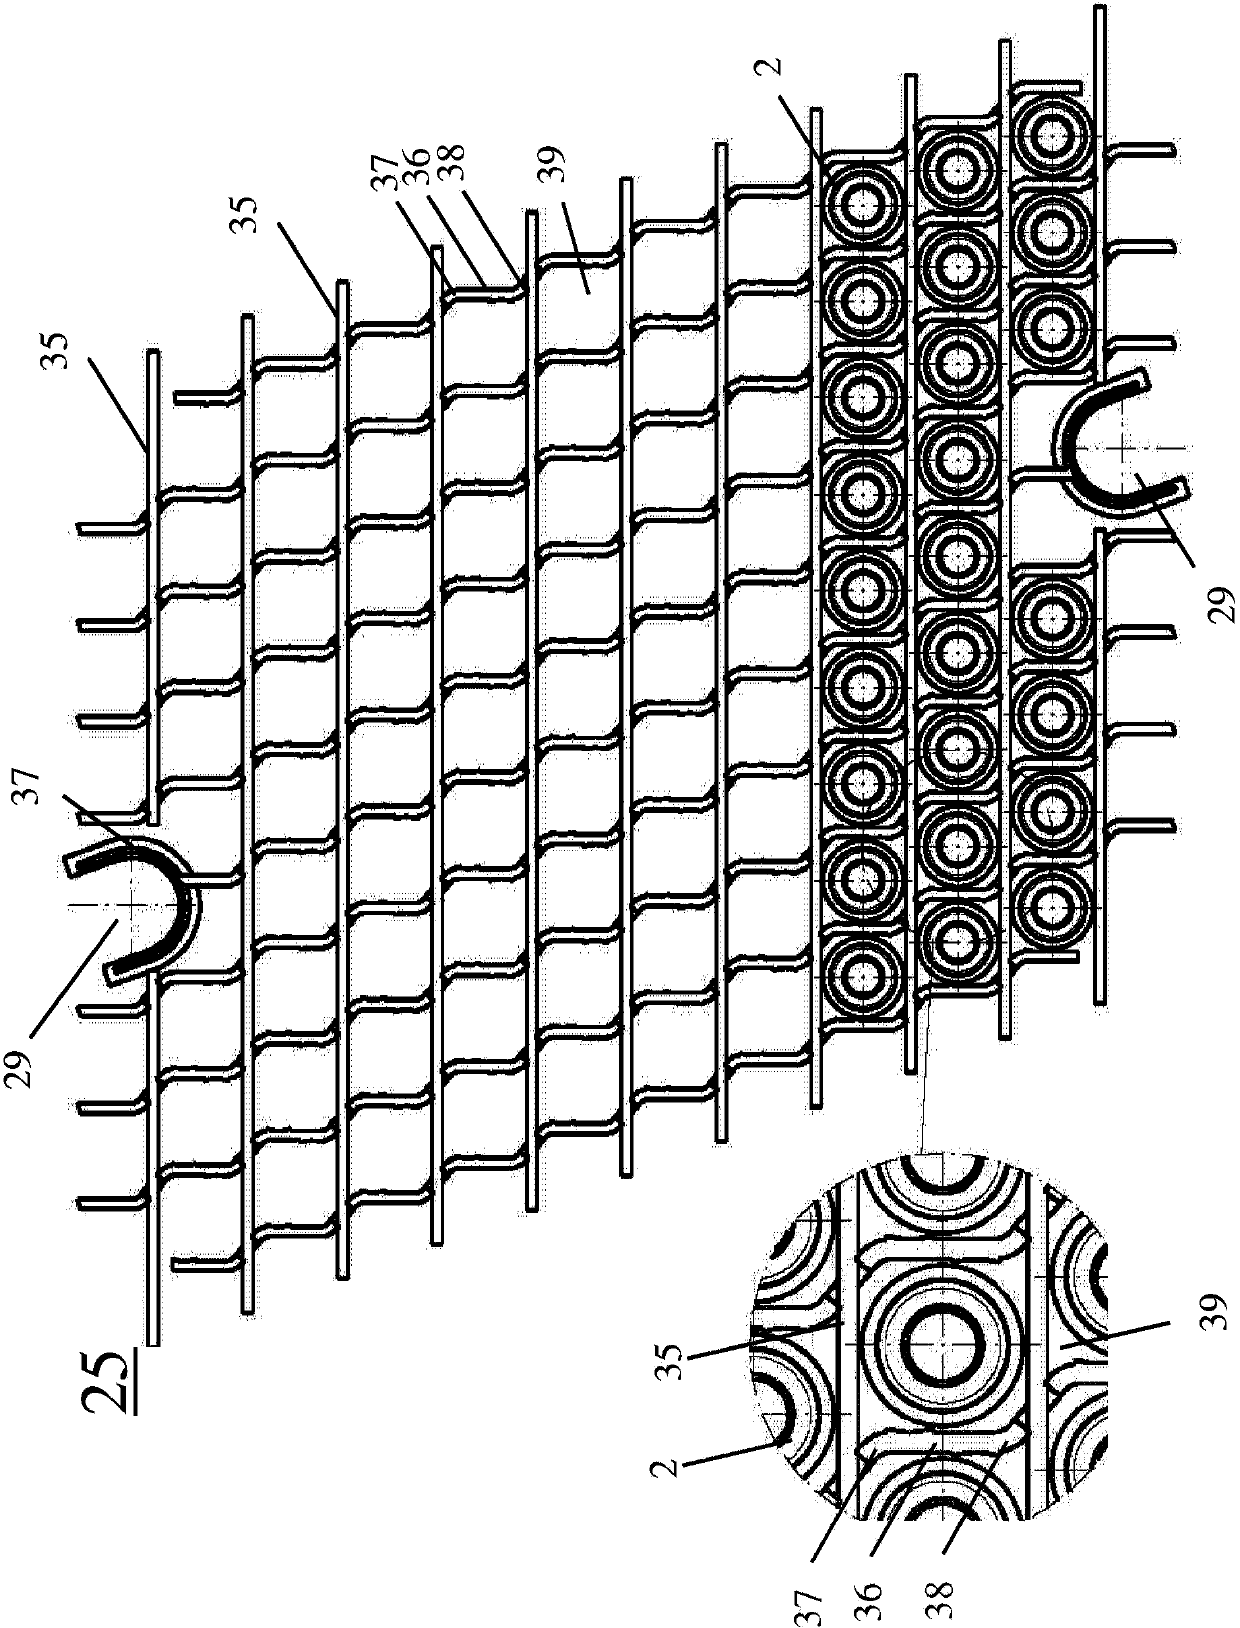 Method and device for treating containers and substances stored therein for medical, pharmaceutical or cosmetic applications